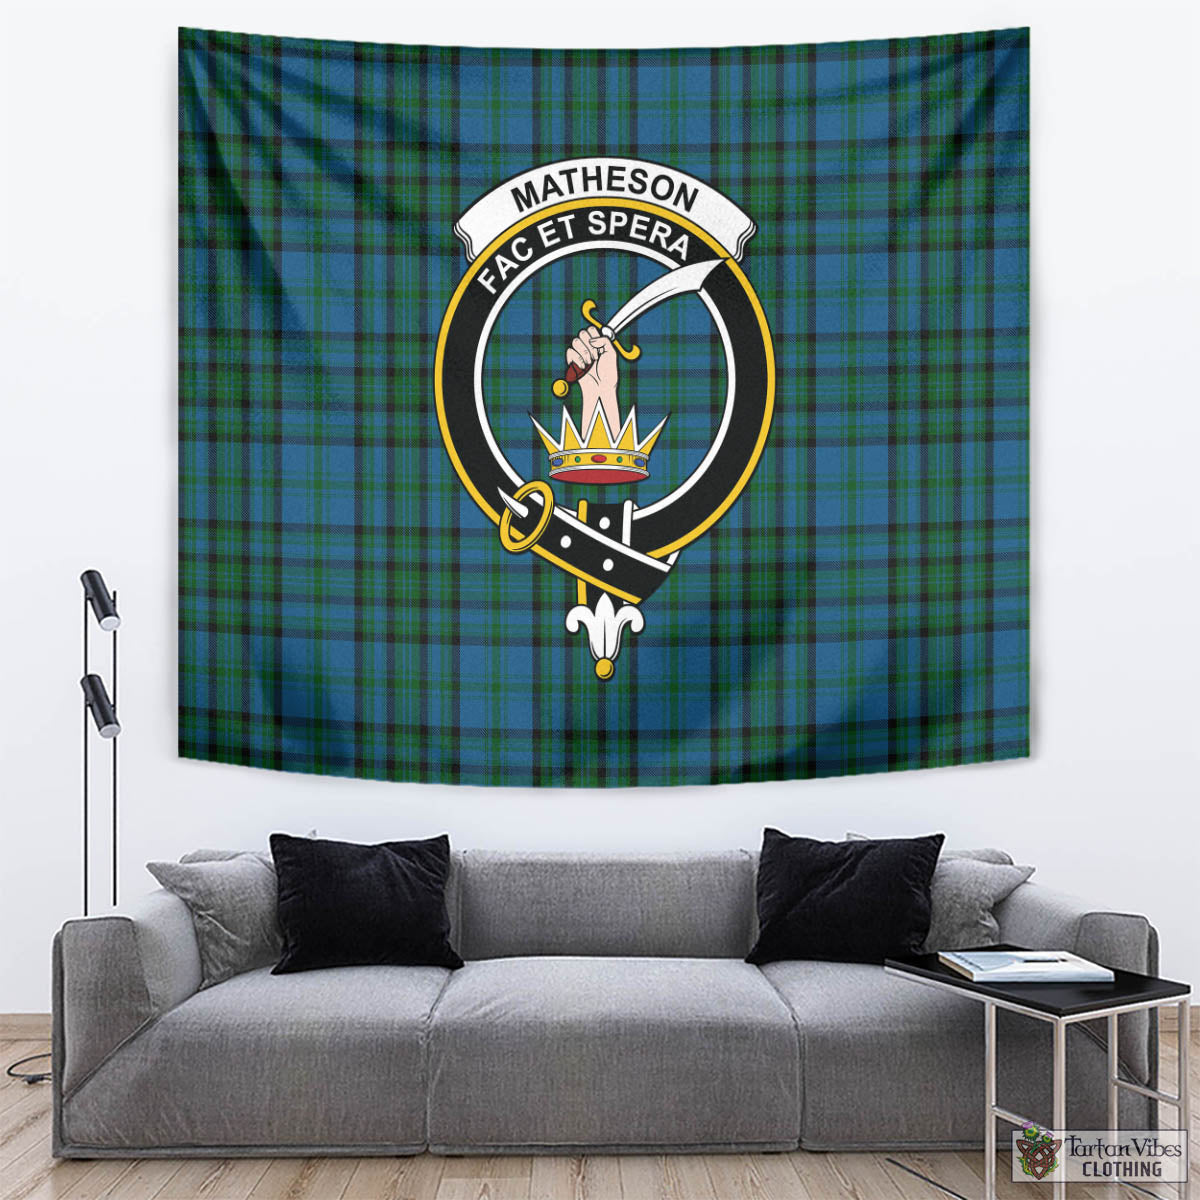 Tartan Vibes Clothing Matheson Hunting Tartan Tapestry Wall Hanging and Home Decor for Room with Family Crest